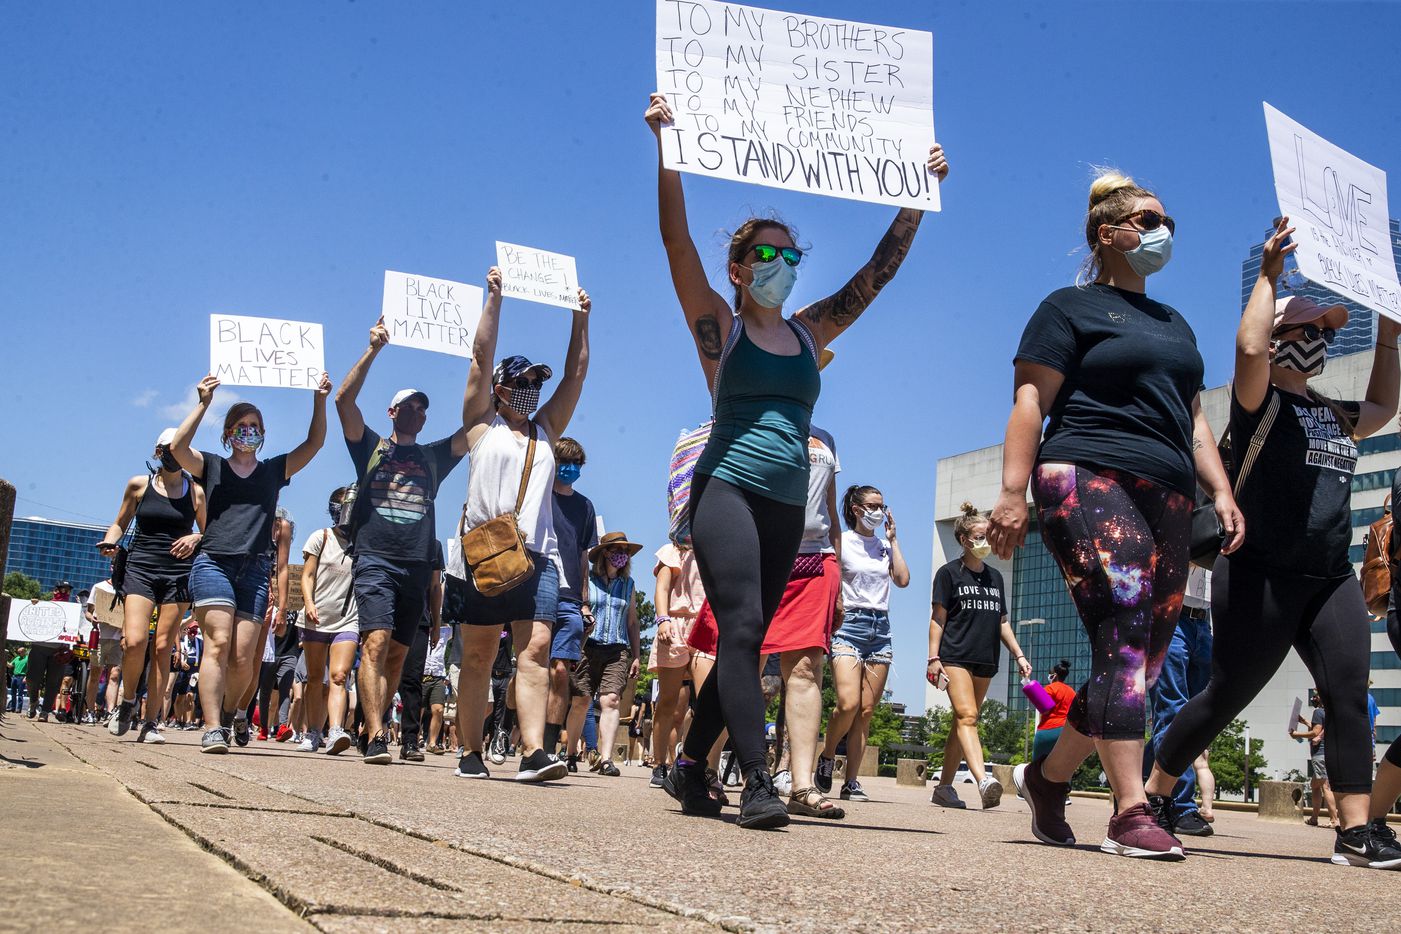 Protesters march in a silent demonstration at Dallas City Hall to denounce police brutality and systemic racism in Dallas on Thursday, June 4, 2020. The demonstration took place on the seventh day of organized protests in response to the recent deaths of George Floyd in Minneapolis and Breonna Taylor in Louisville.